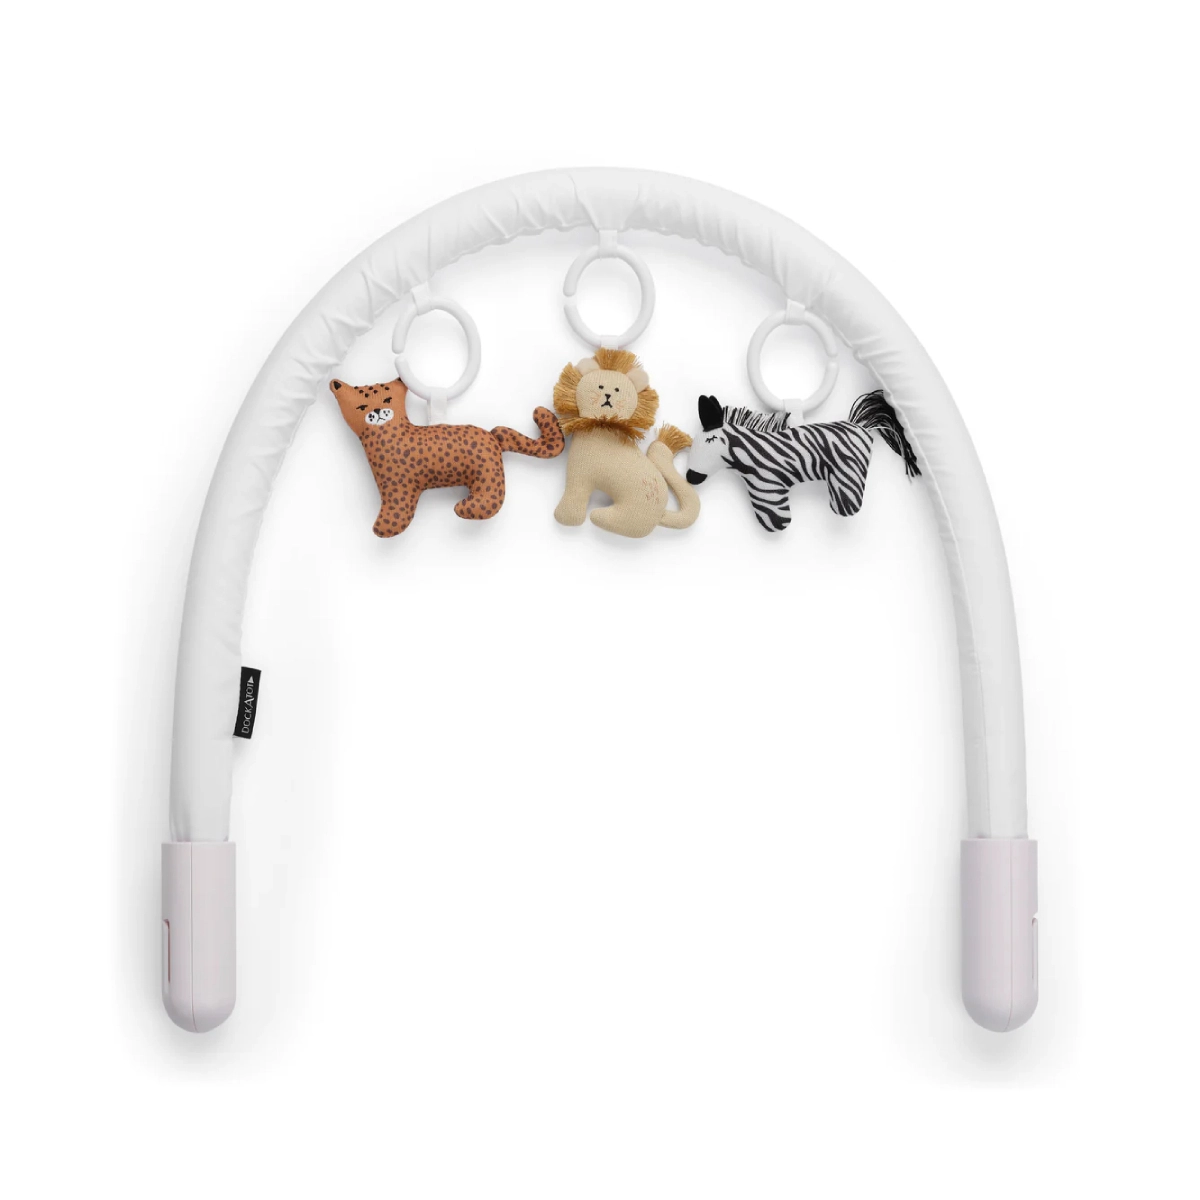 Dock A Tot Mobile Arch Toy Bundle